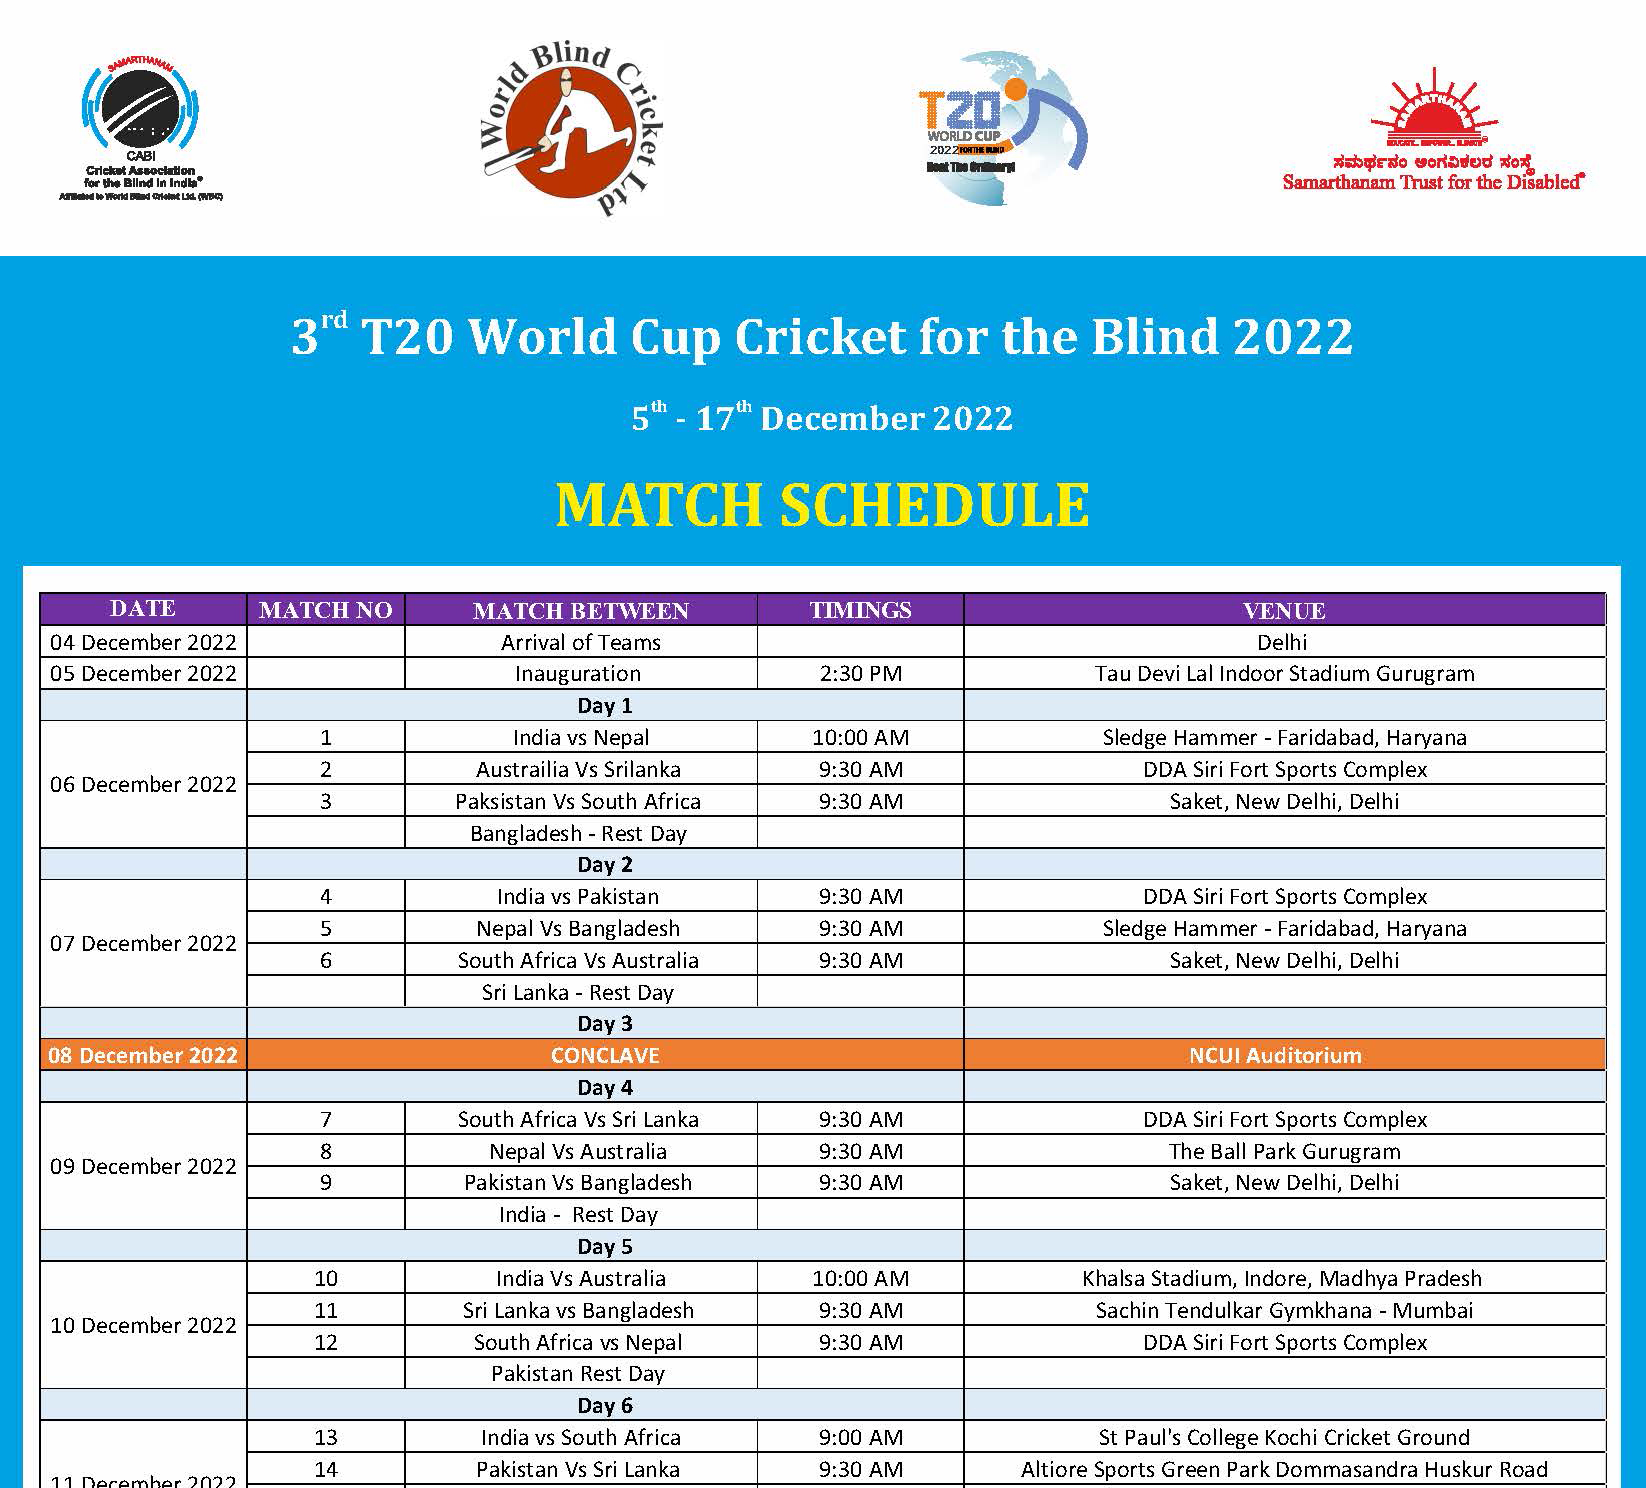 MATCH SCHEDULE Of 3rd T20 World Cup Cricket For The Blind 2022